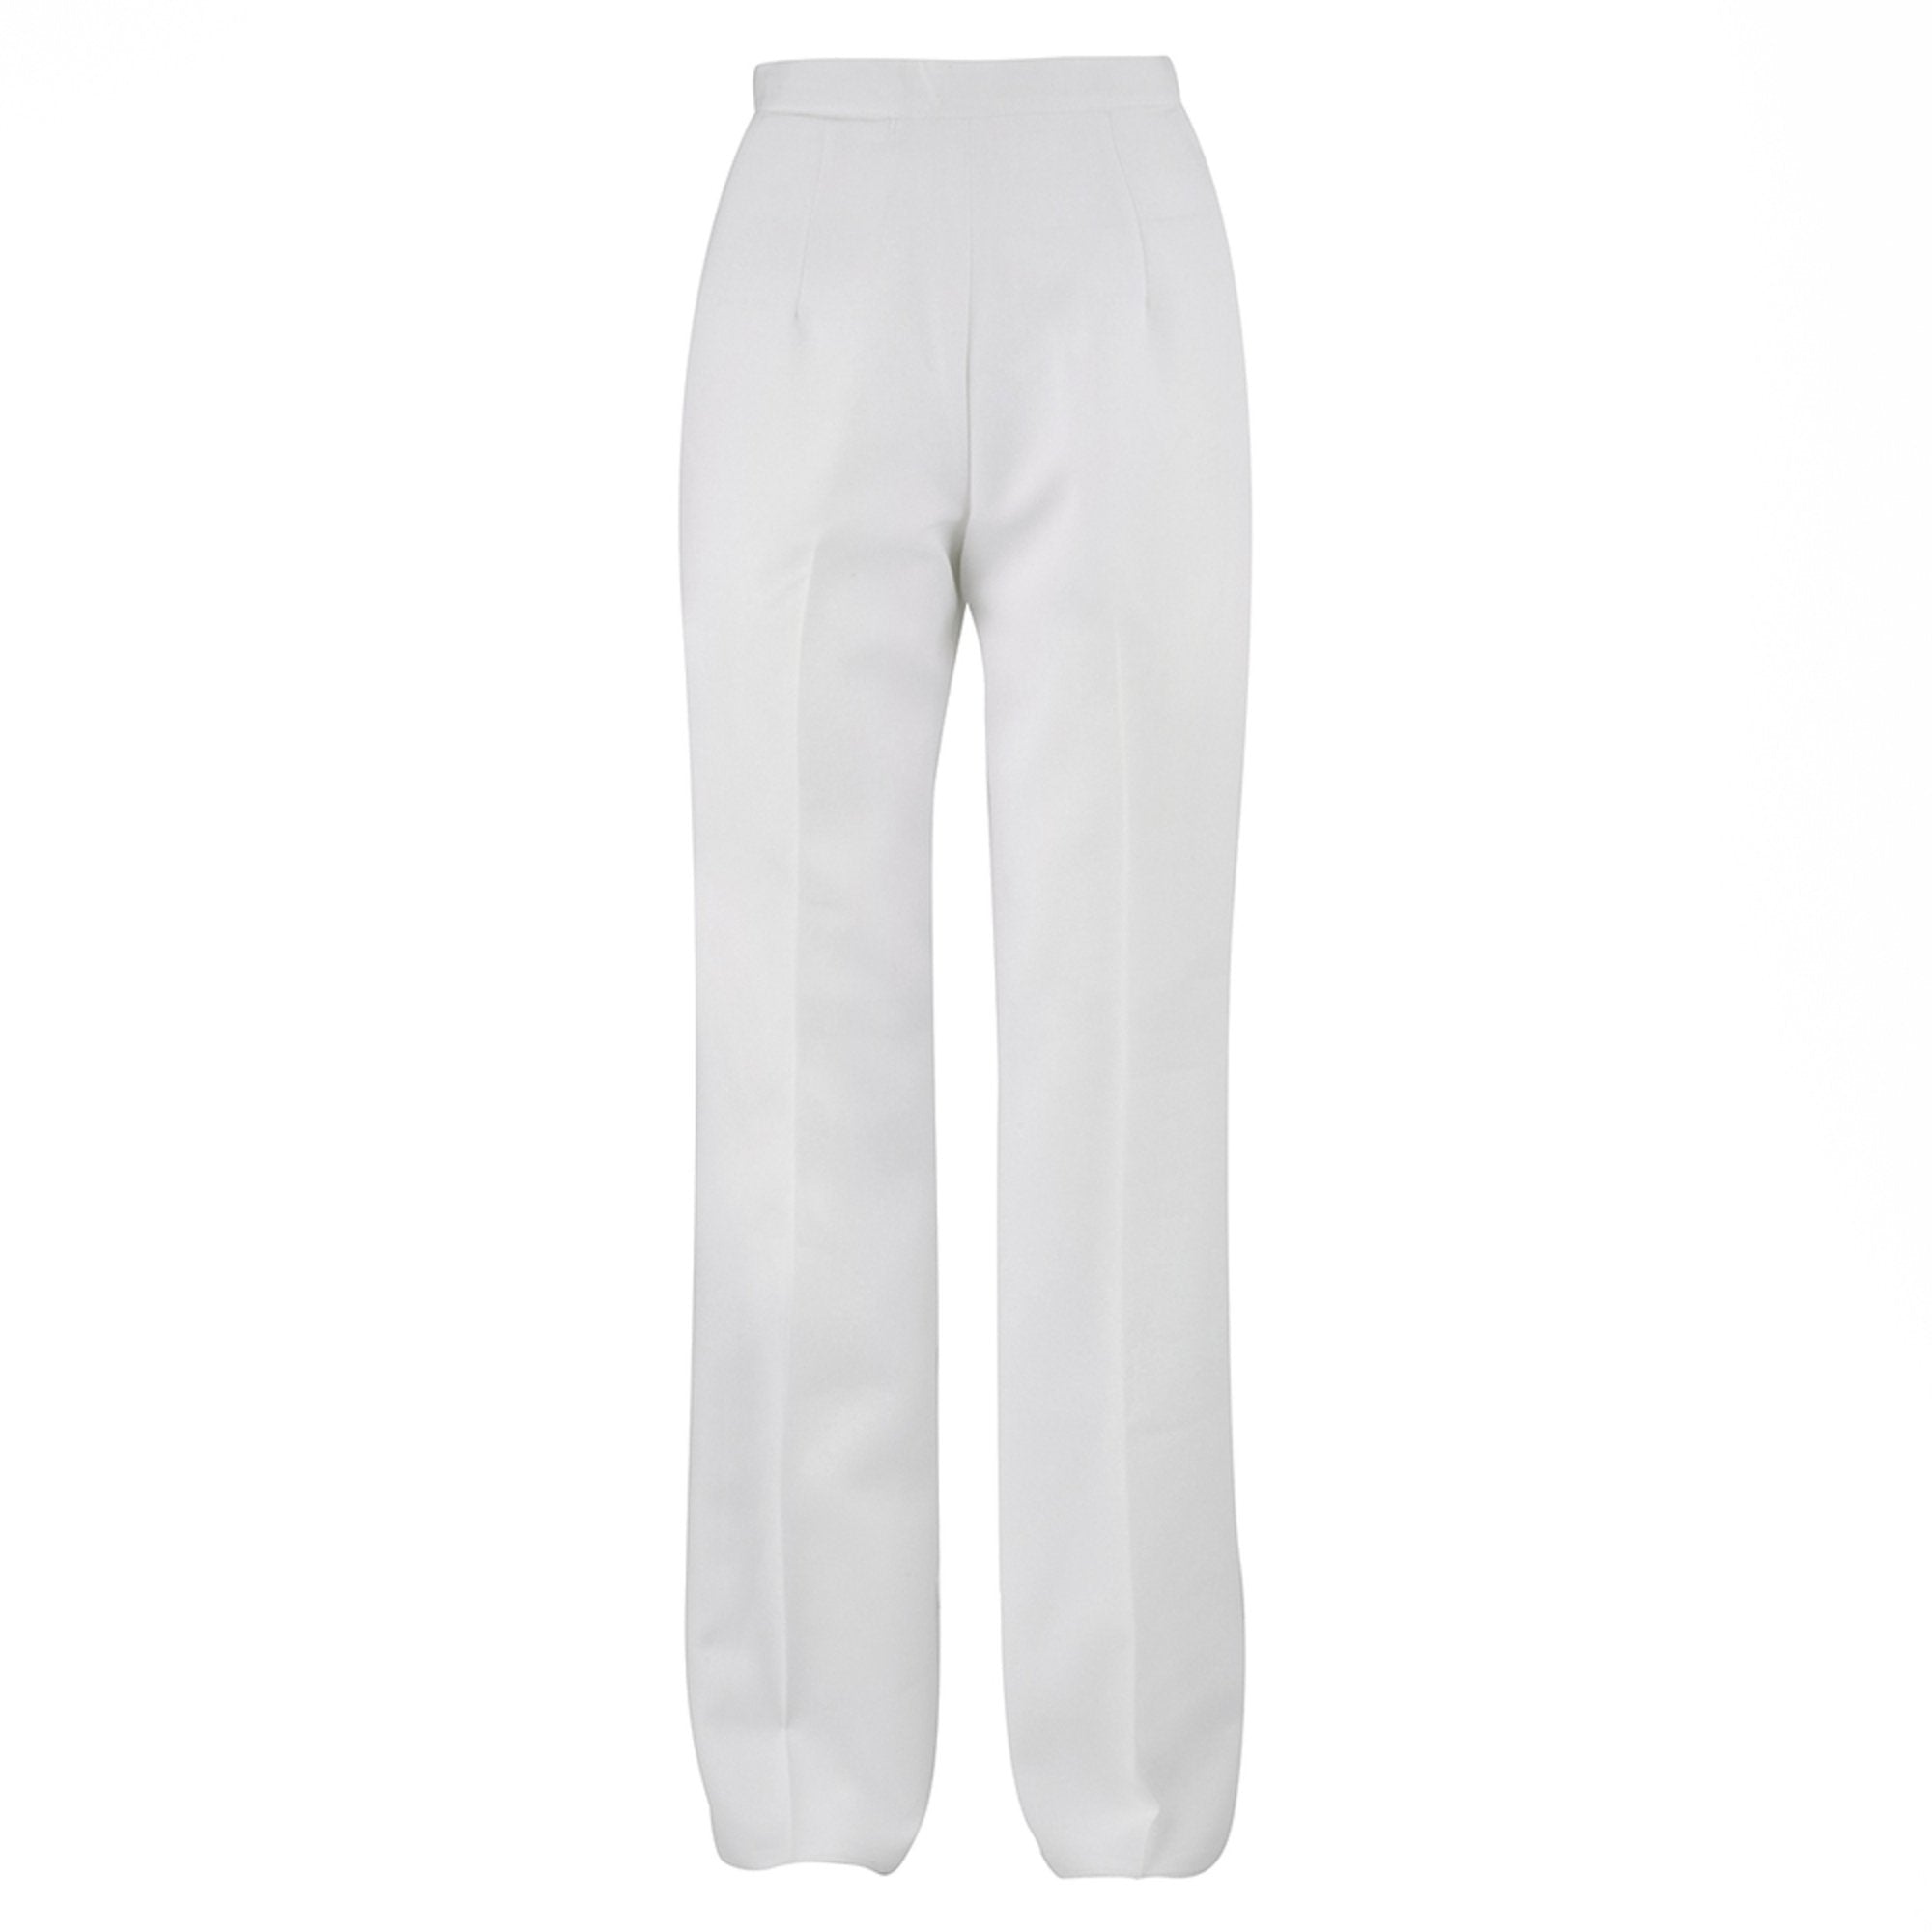 NAVY Women Officer/Chief Petty Officer Dress White Unbelted Trousers |  Uniform Trading Company